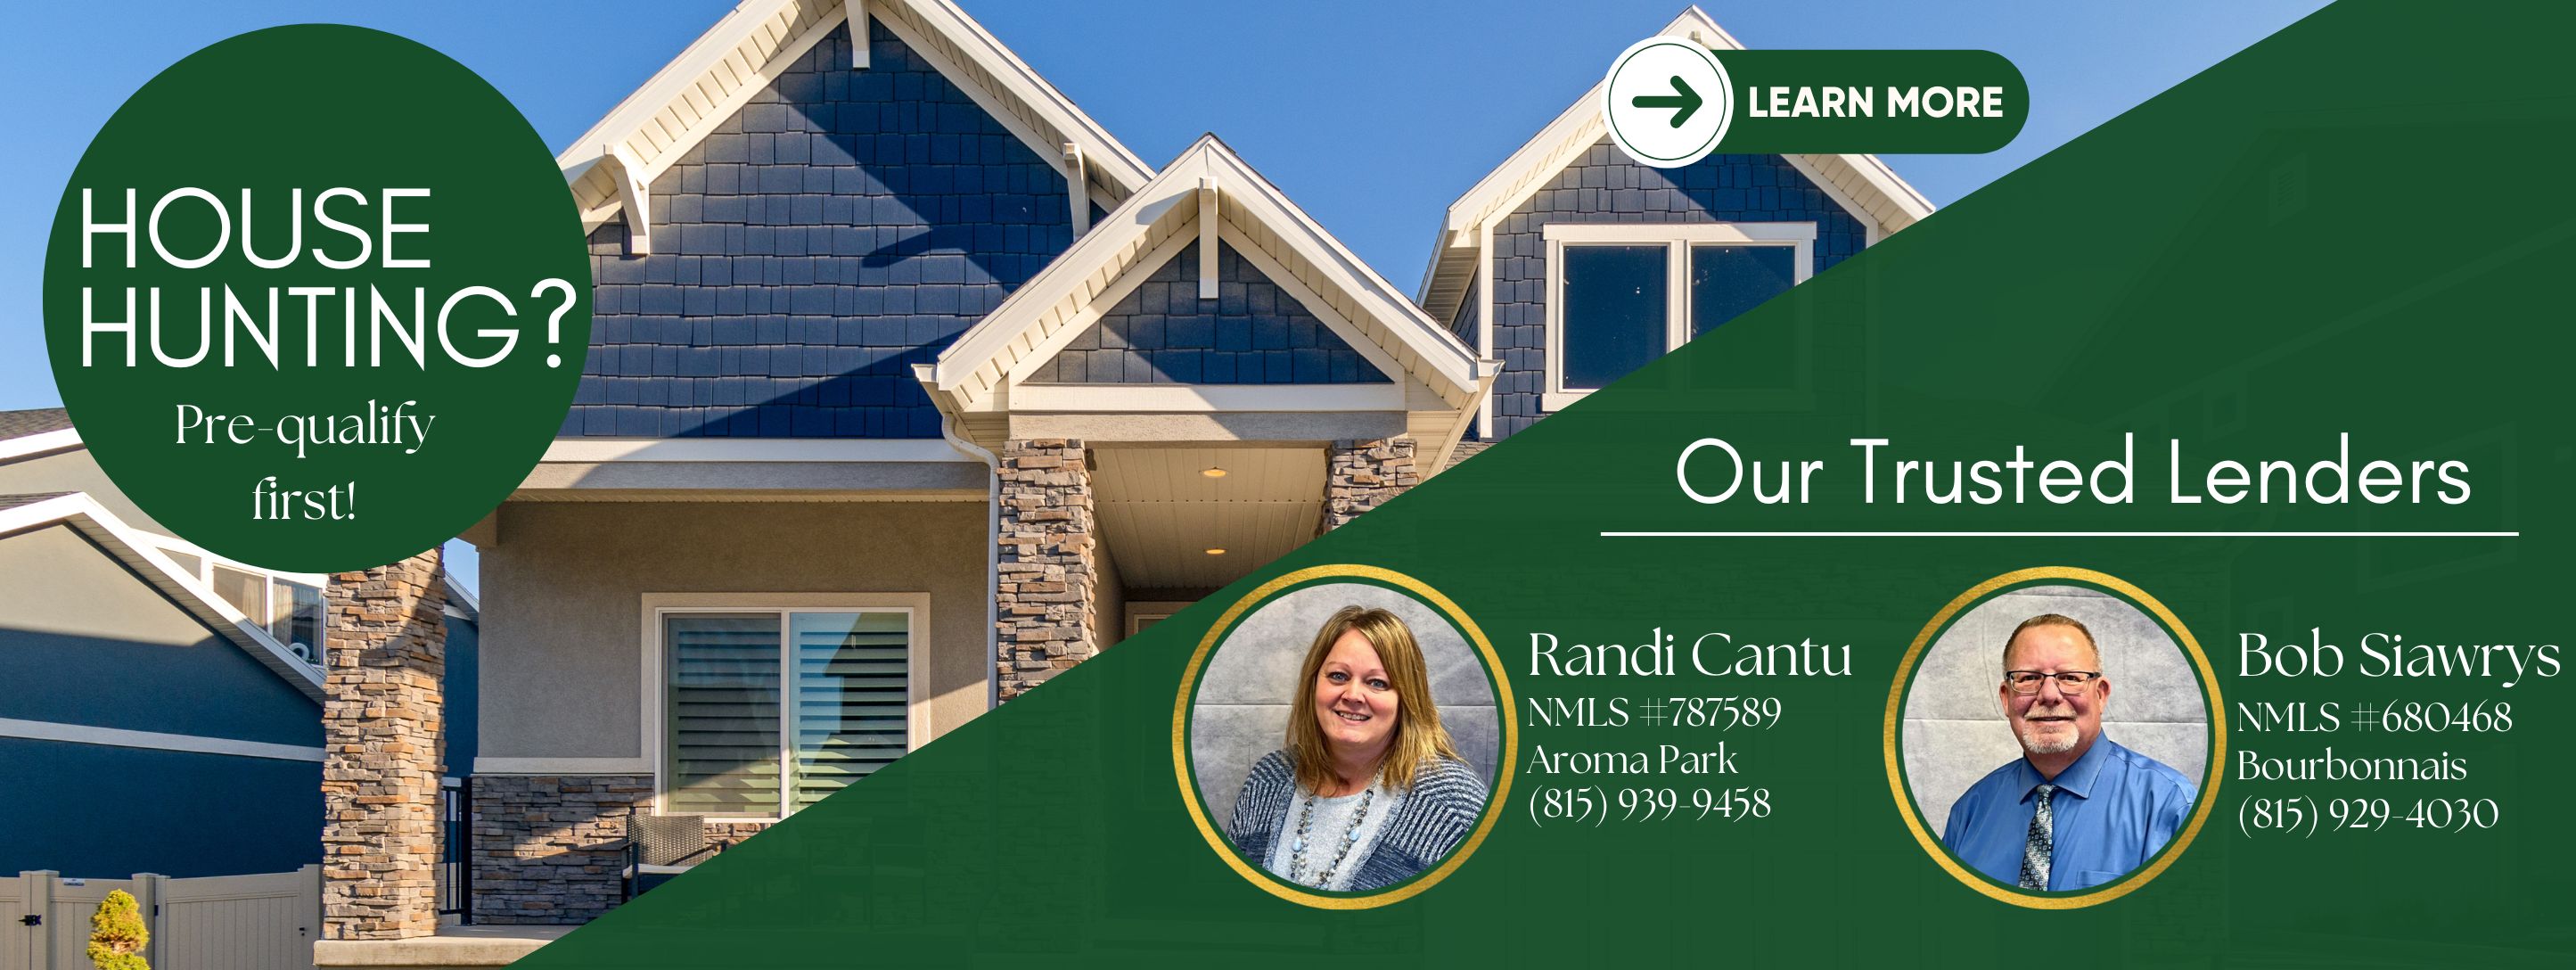 House Hunting? Pre-qualify first! Our Trusted Lenders: Randi Cantu, NMLS #787589, Aroma Park, 815-939-9458. Bob Siawrys, NMLS #680468, Bourbonnais, 815-929-4030. Learn More.